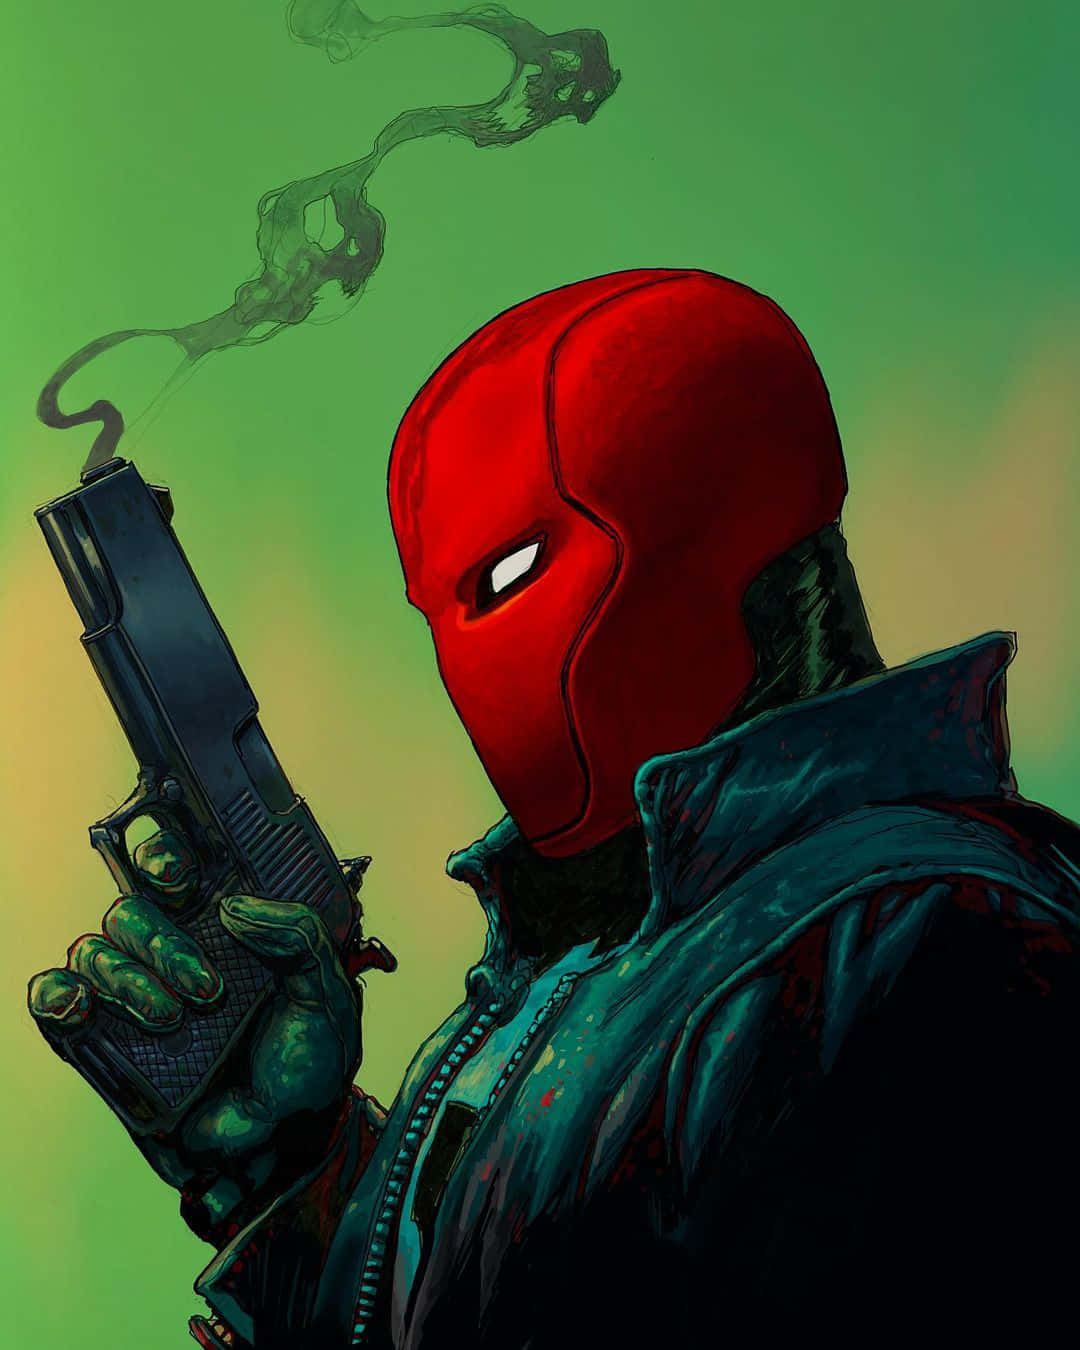 Red Hood is Ready for Action